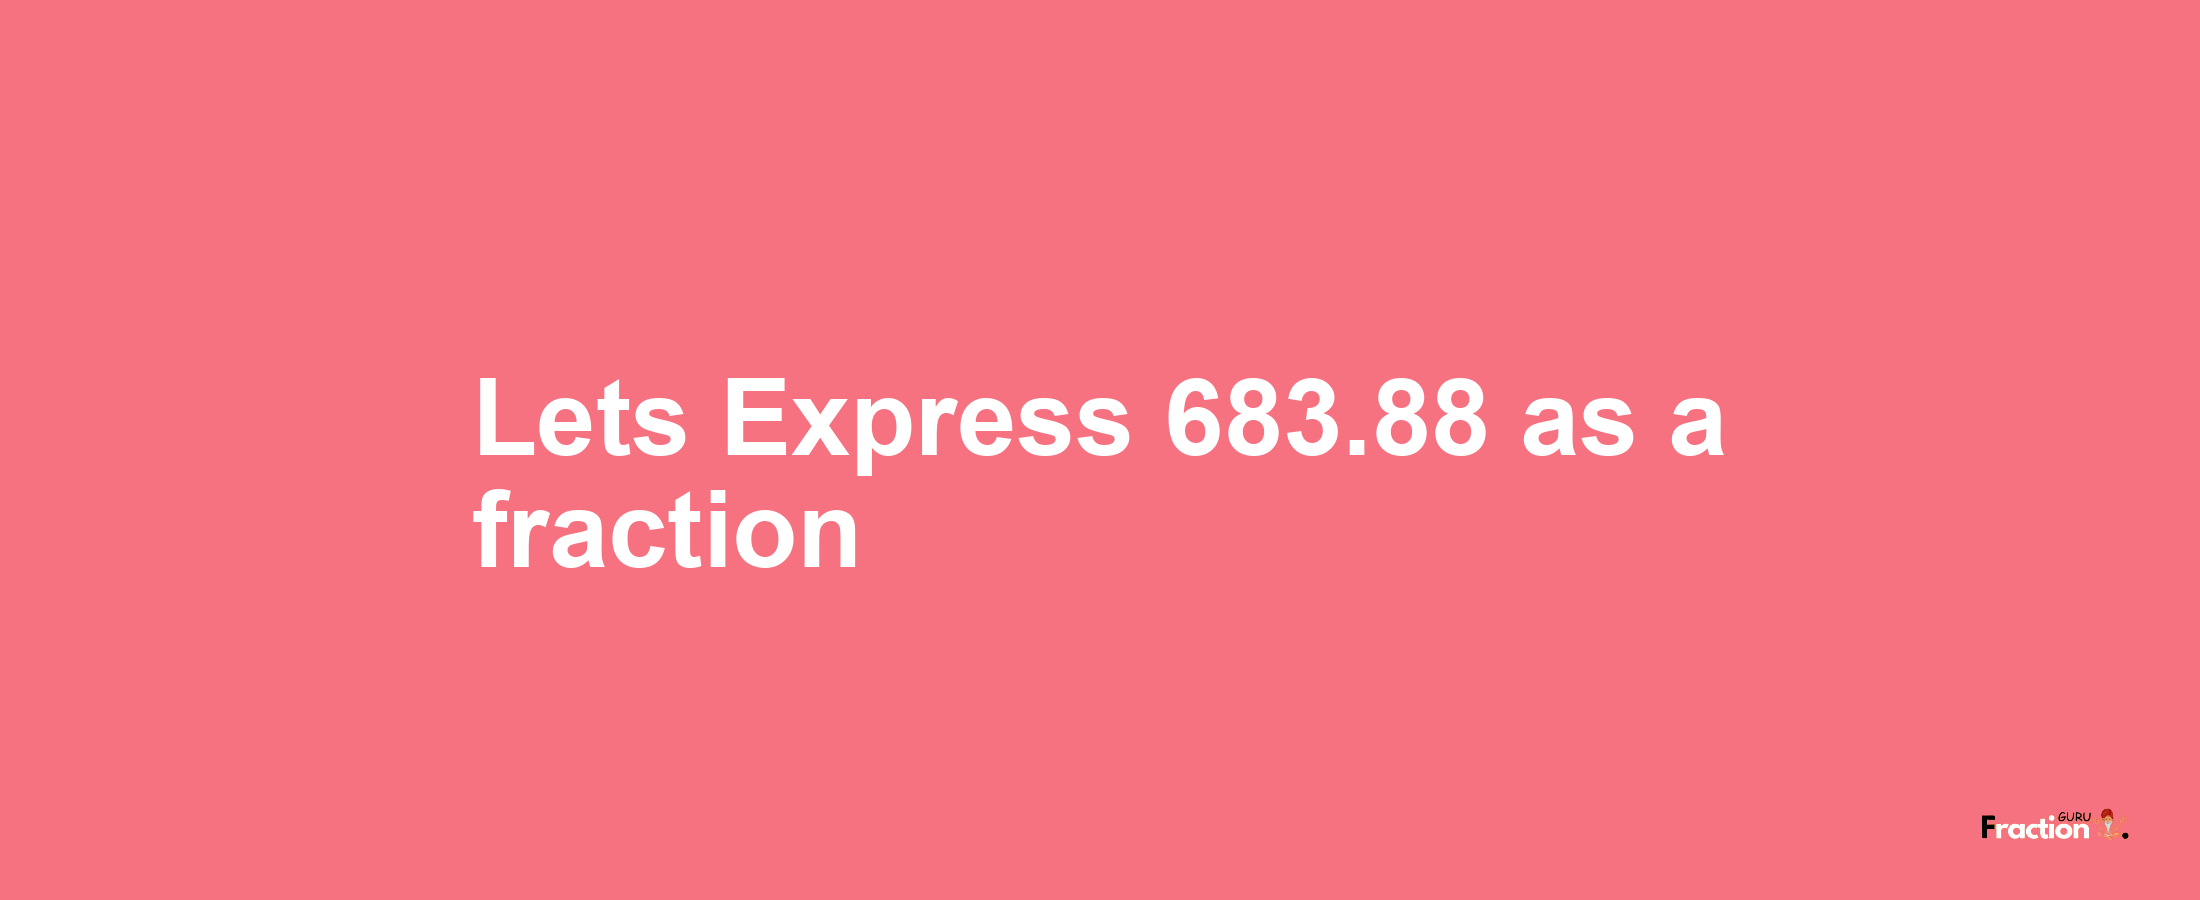 Lets Express 683.88 as afraction